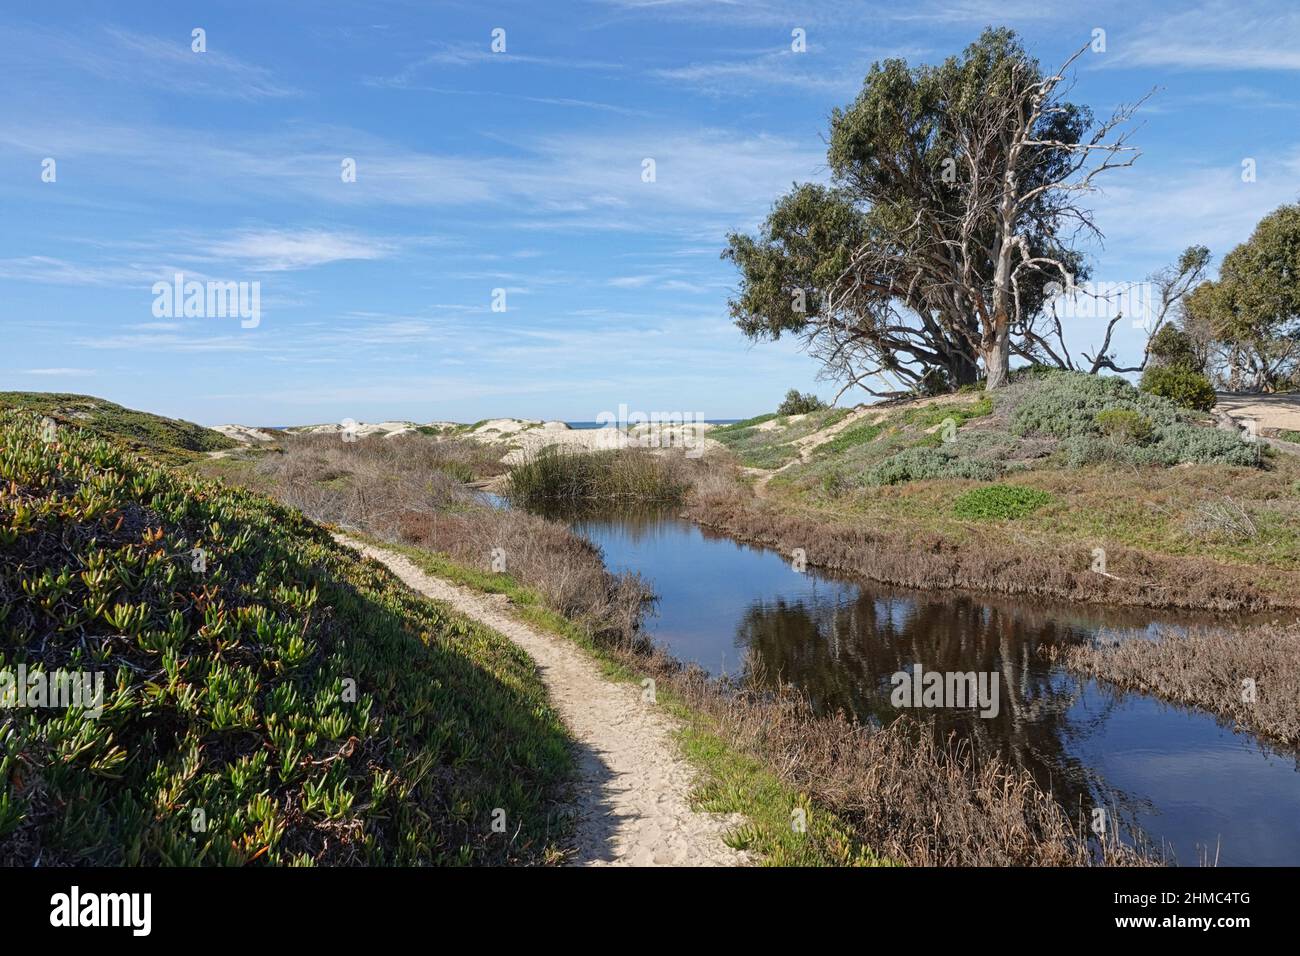 In Pismo Beach, California, sandy trails wind through dunes and alongside a creek that leads to the Pacific Ocean during a partly cloudy afternoon. Stock Photo